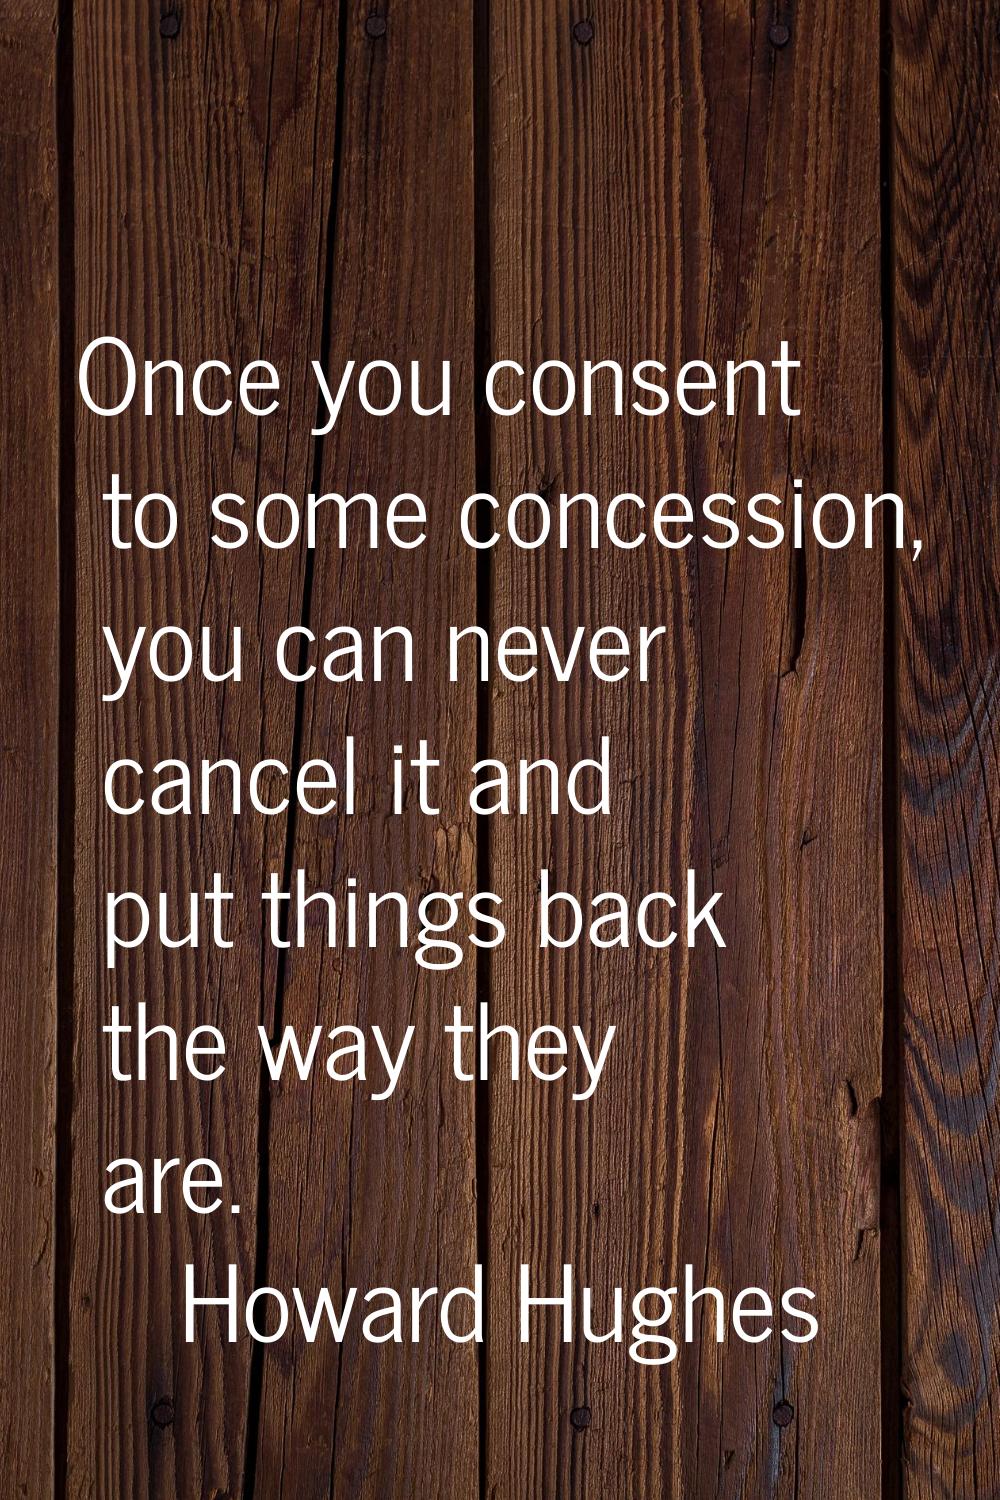 Once you consent to some concession, you can never cancel it and put things back the way they are.